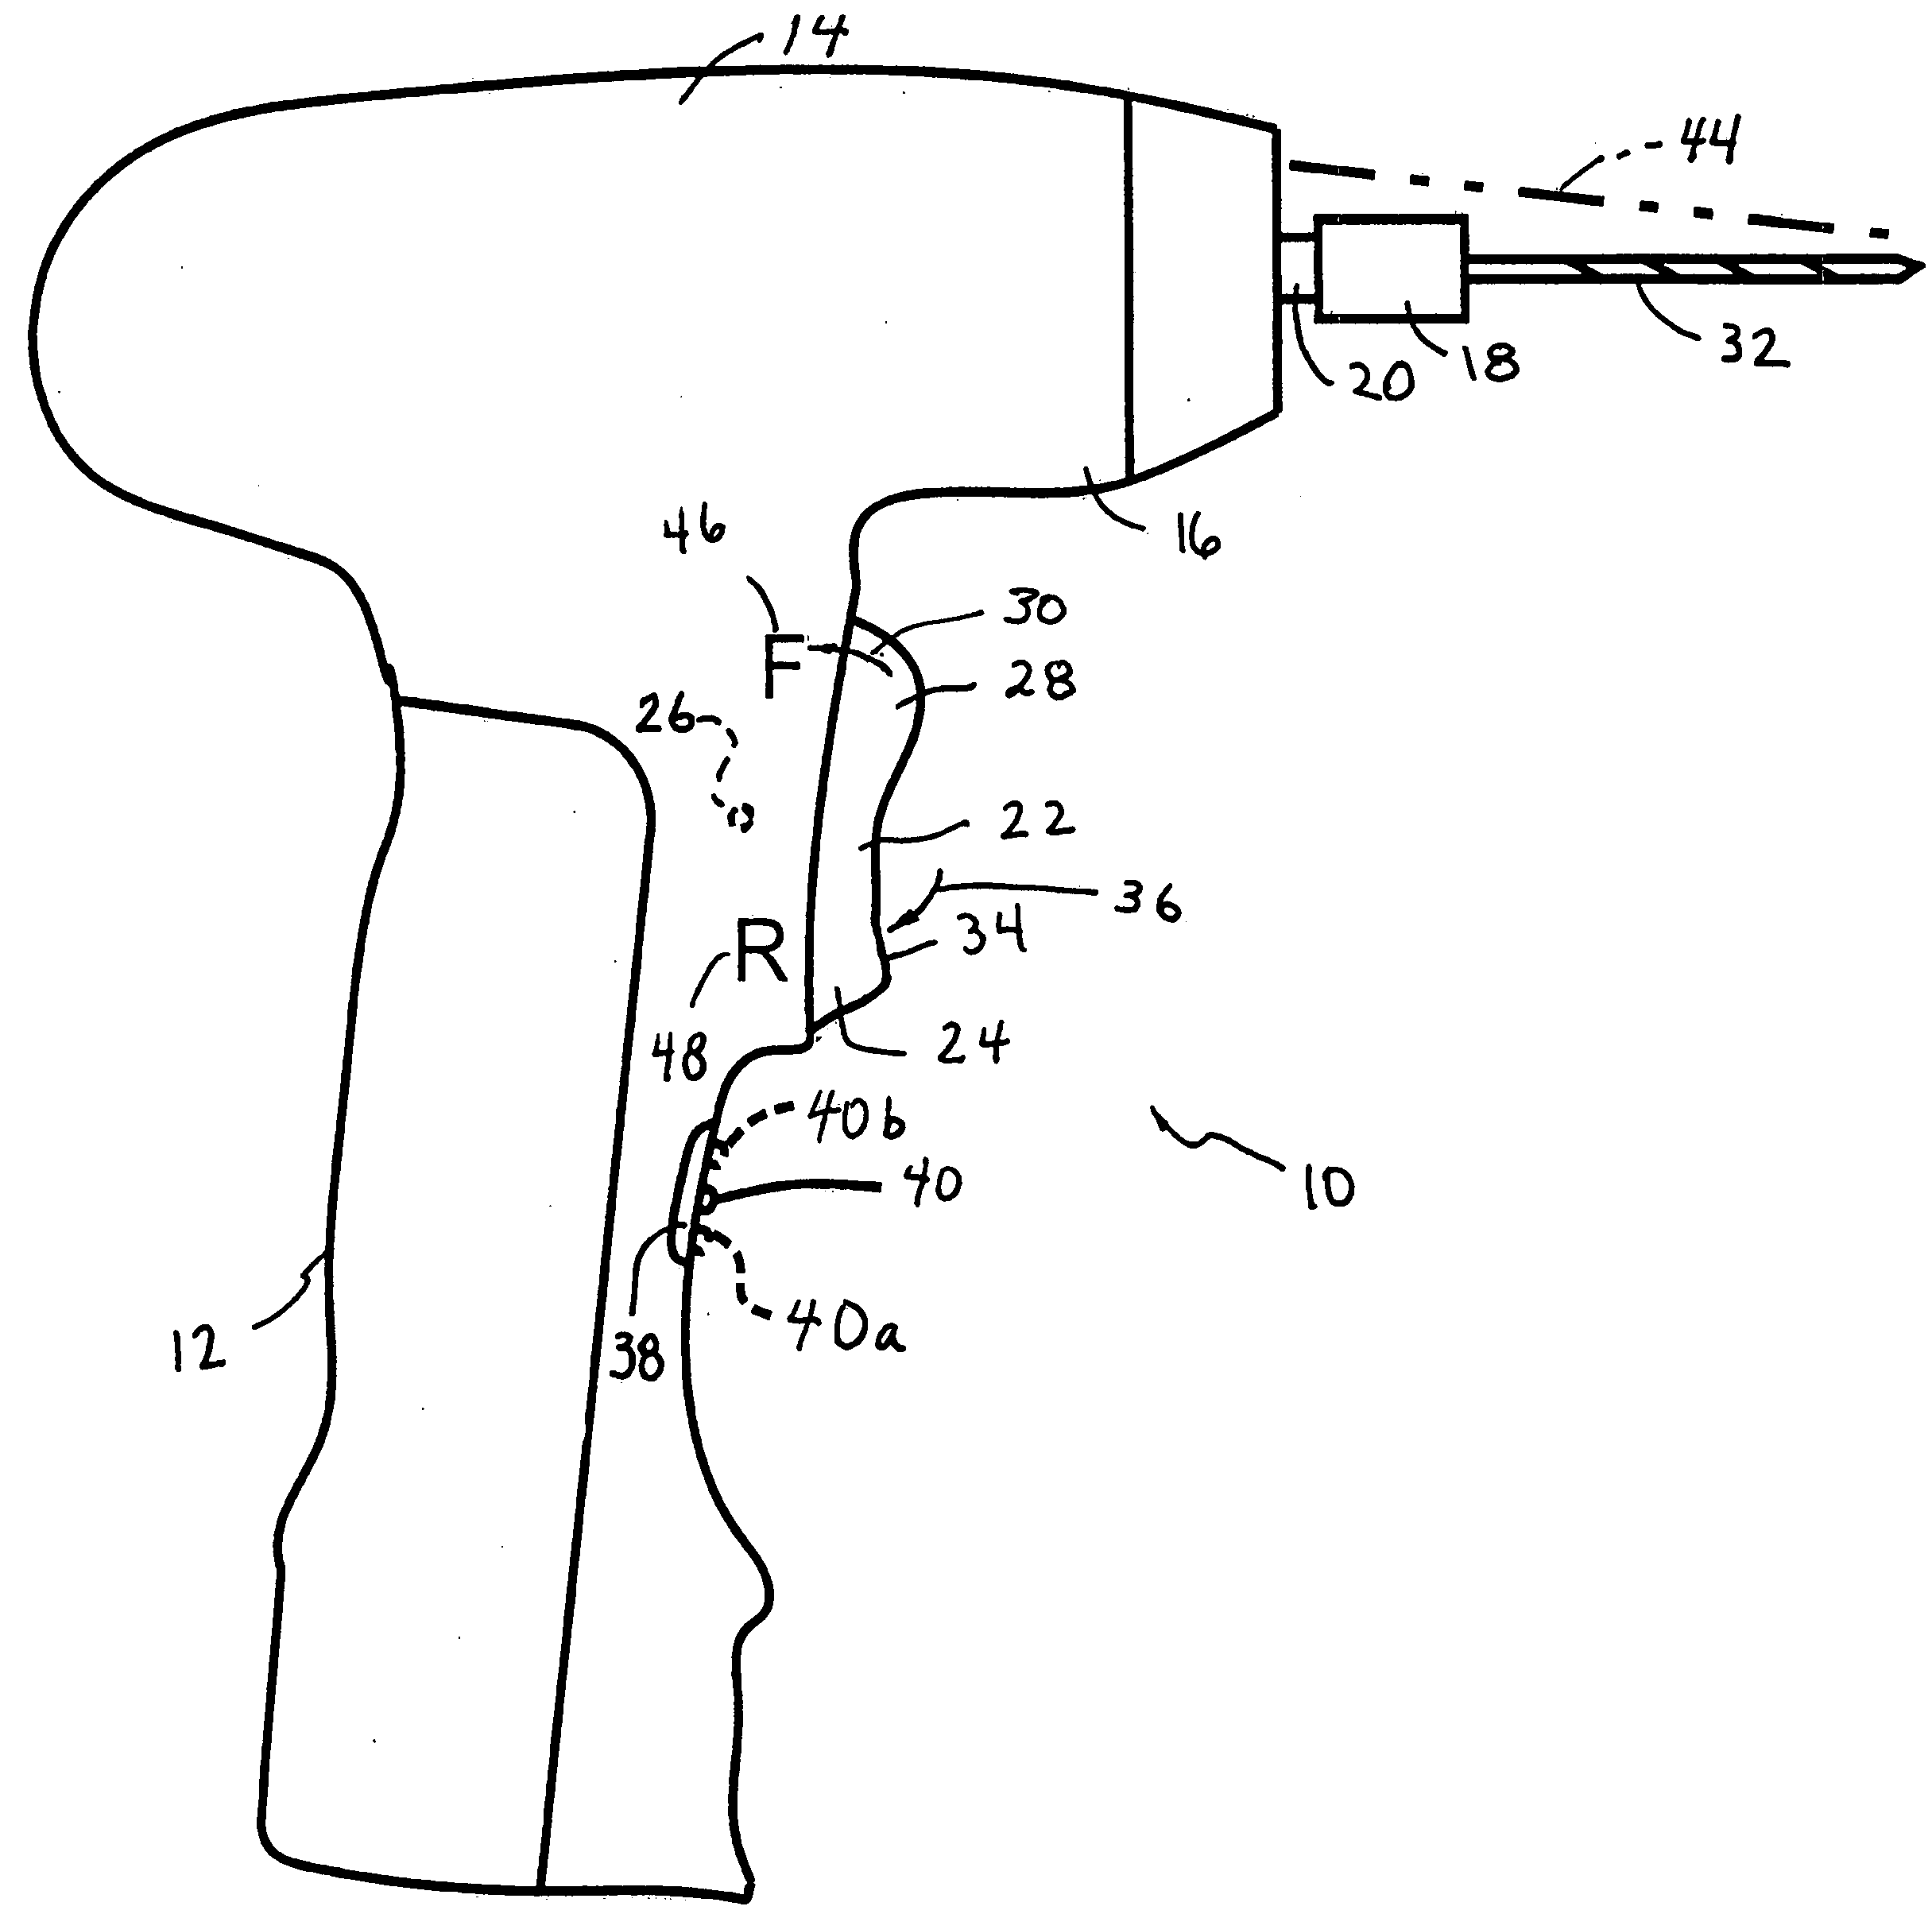 Electric drill with charge state and directional indicator